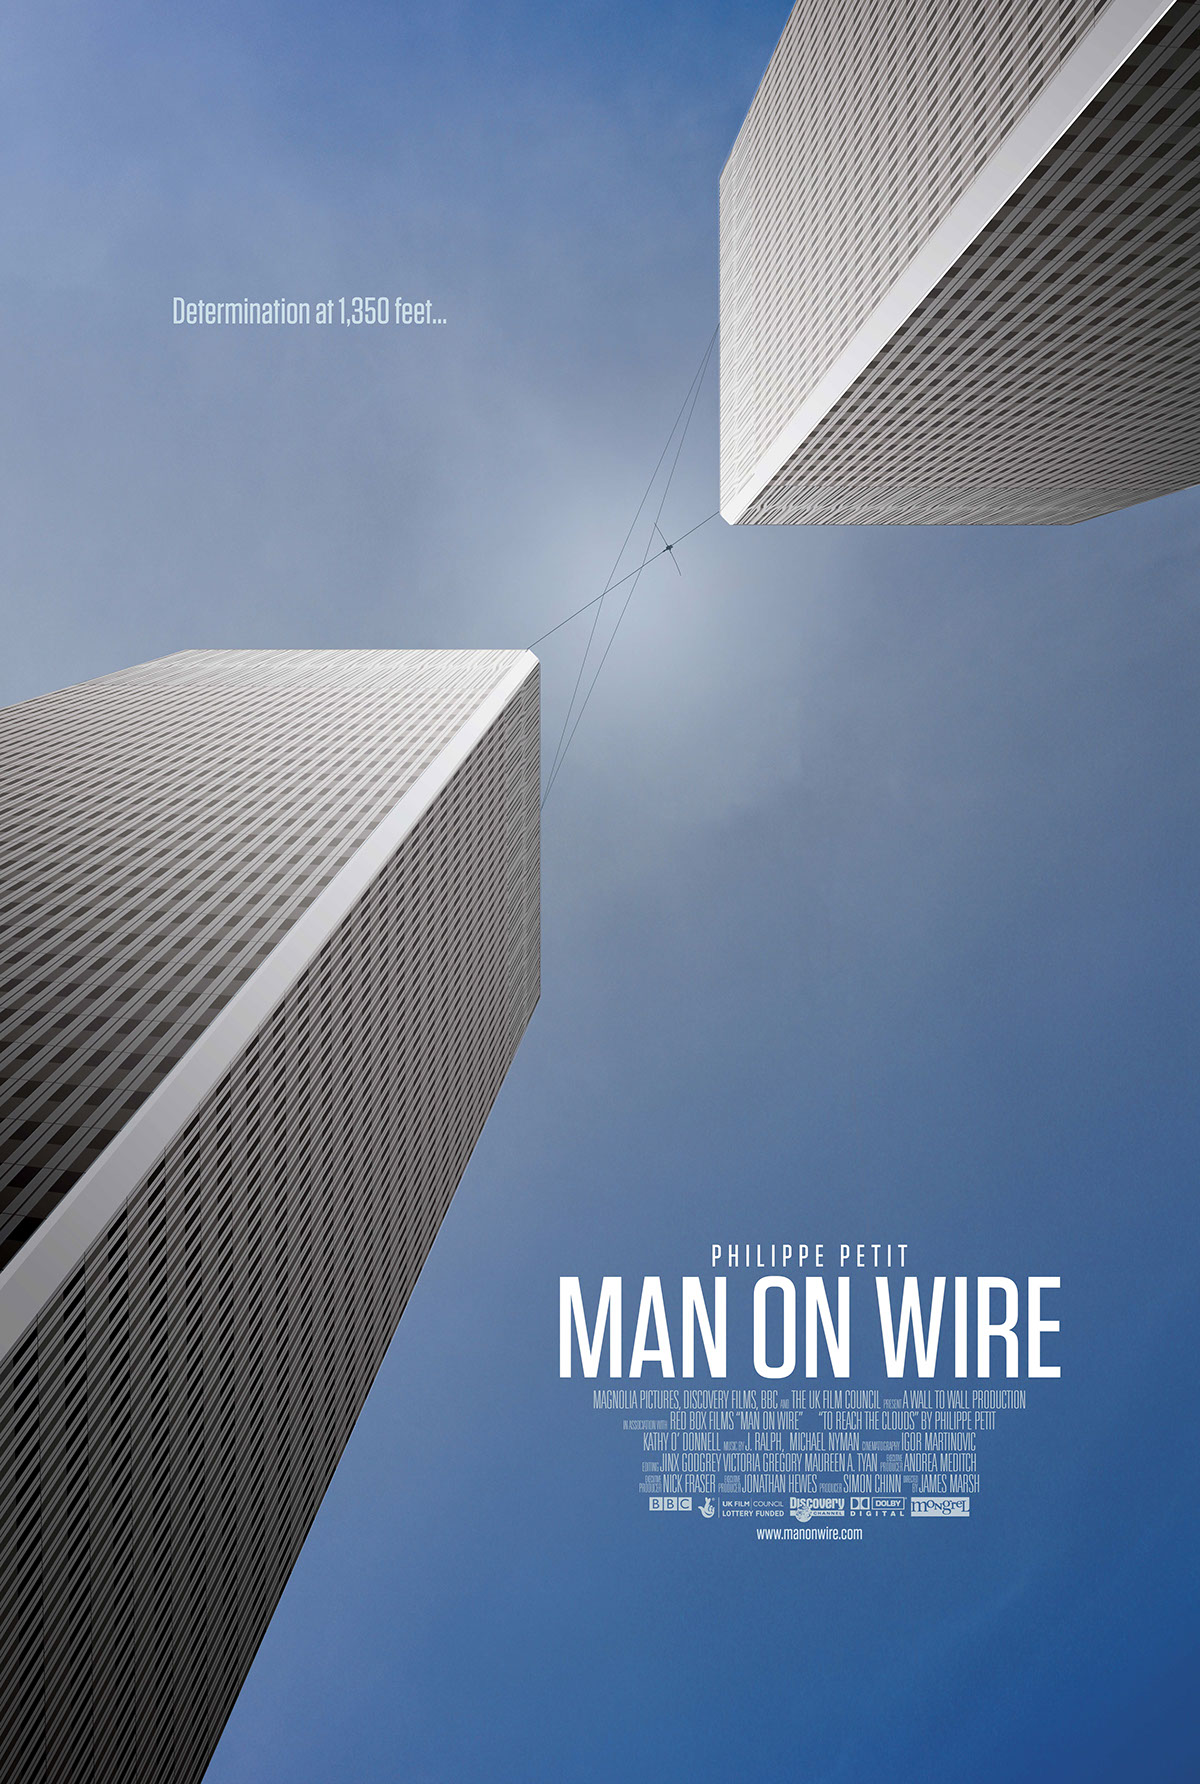 125 Man on Wire — PIMPS OF GORE